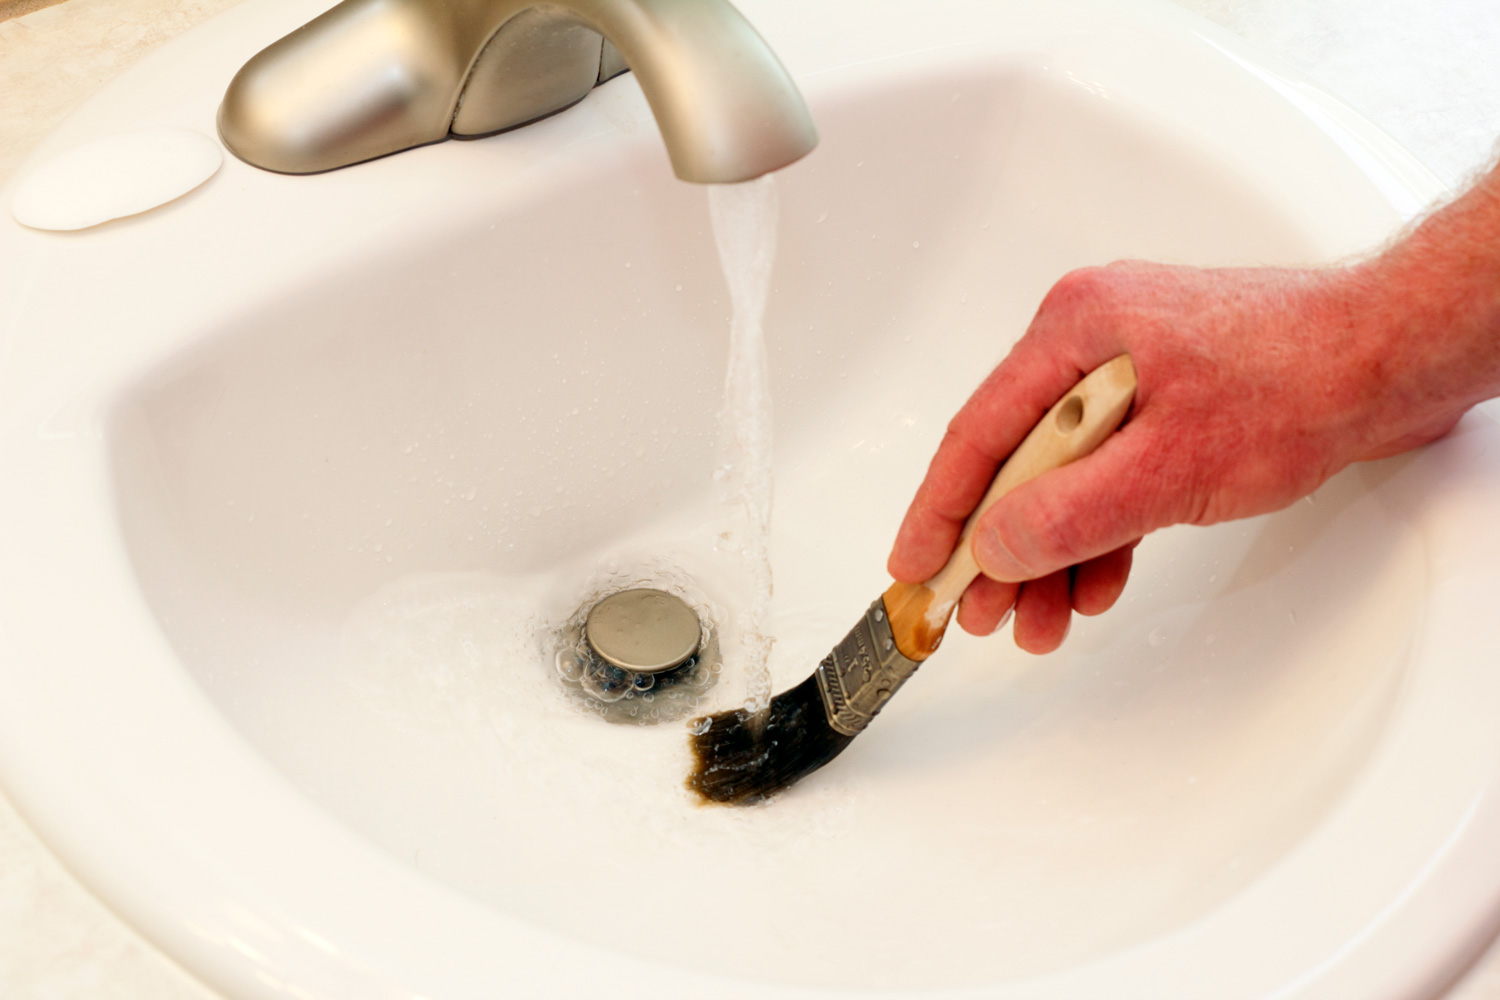 Male caucasian hand rinsing a one inch wooden handle paintbrush under running water in a white bathroom sink.